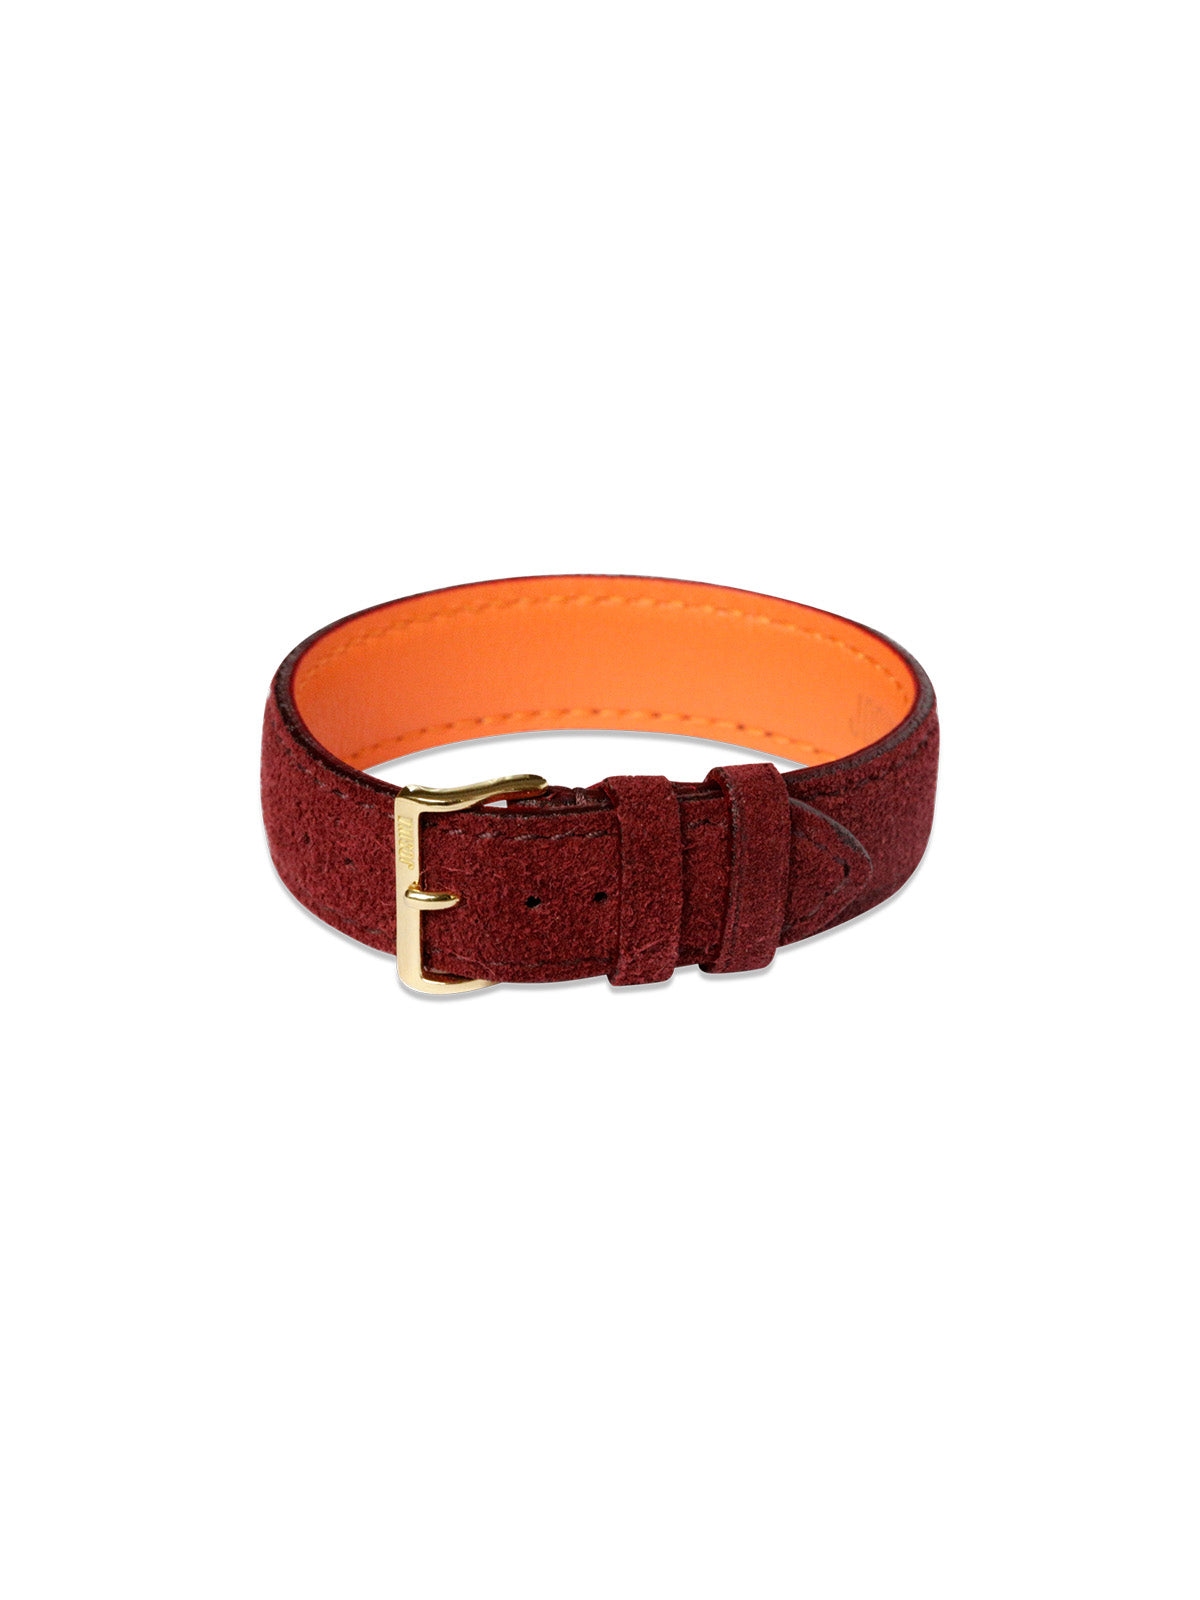 Embracelet Suede - with 18kt solid gold buckle